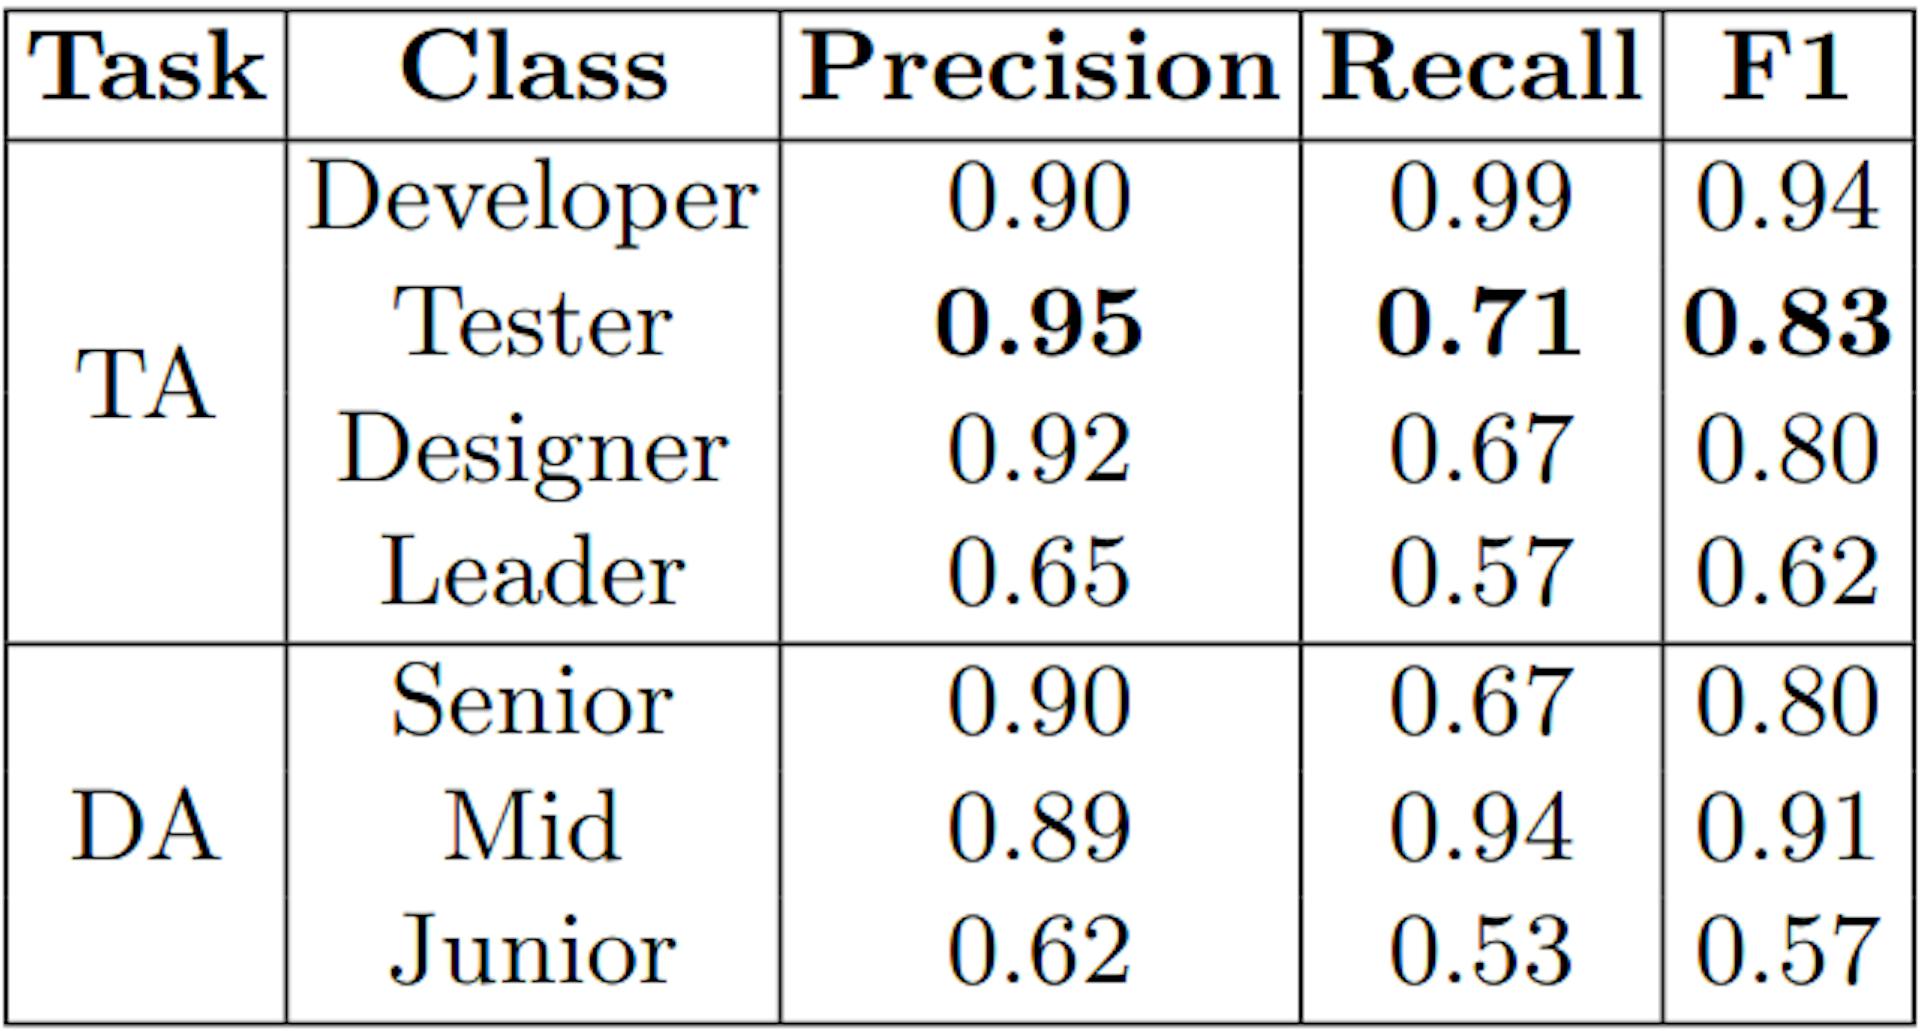 Table 6: Performance metrics for each class in the Stacking algorithm.